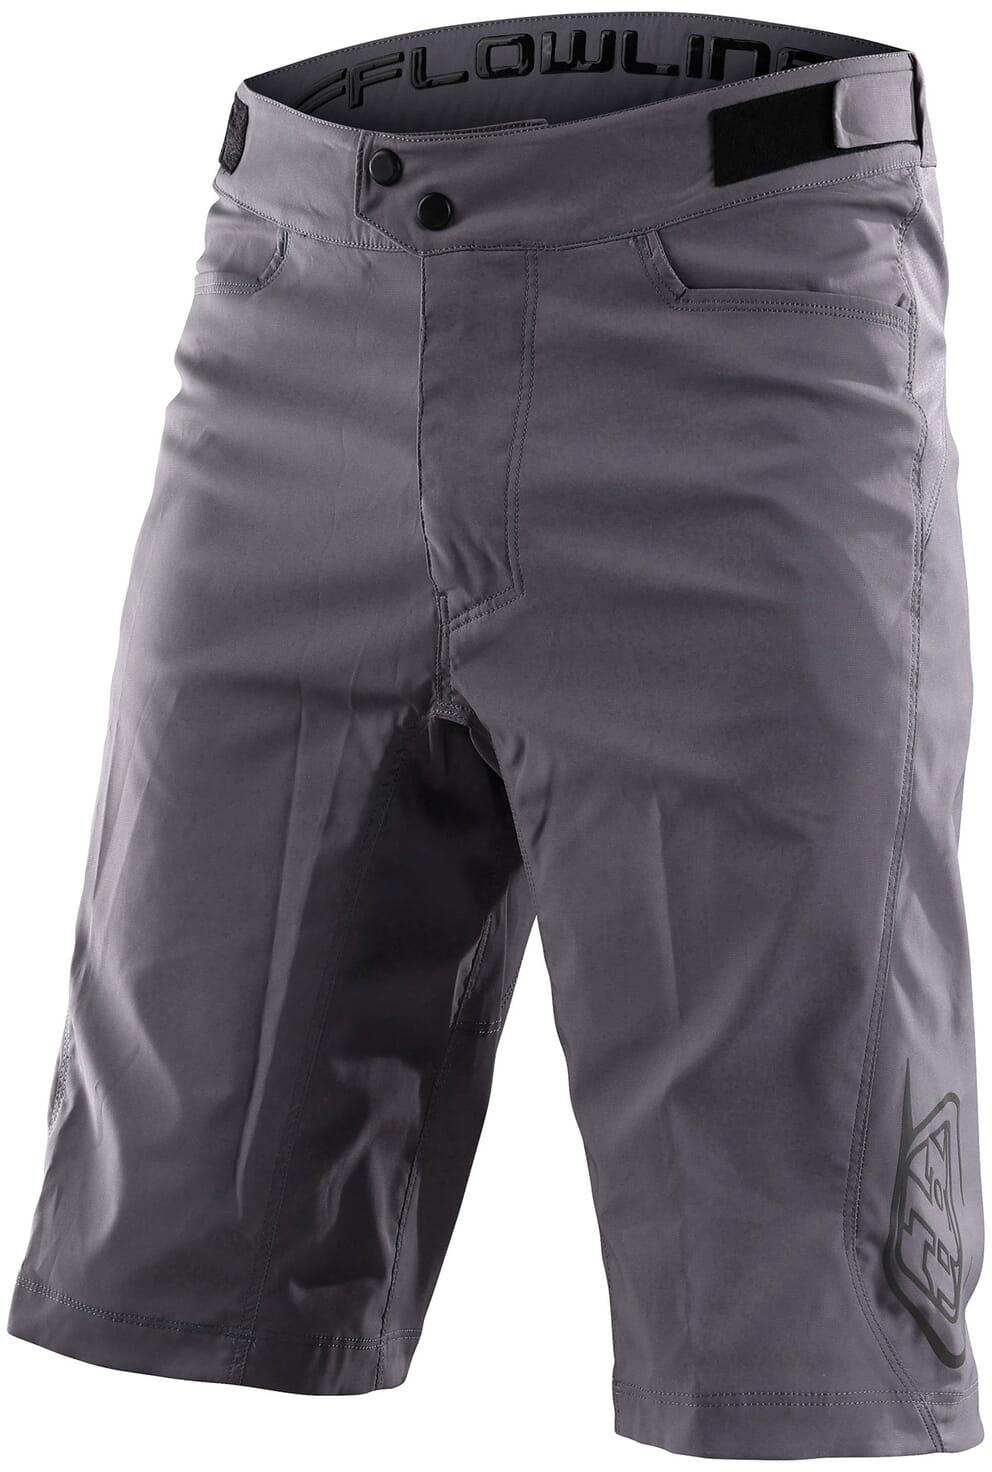 Troy Lee Designs Flowline Shorts - Solid Charcoal